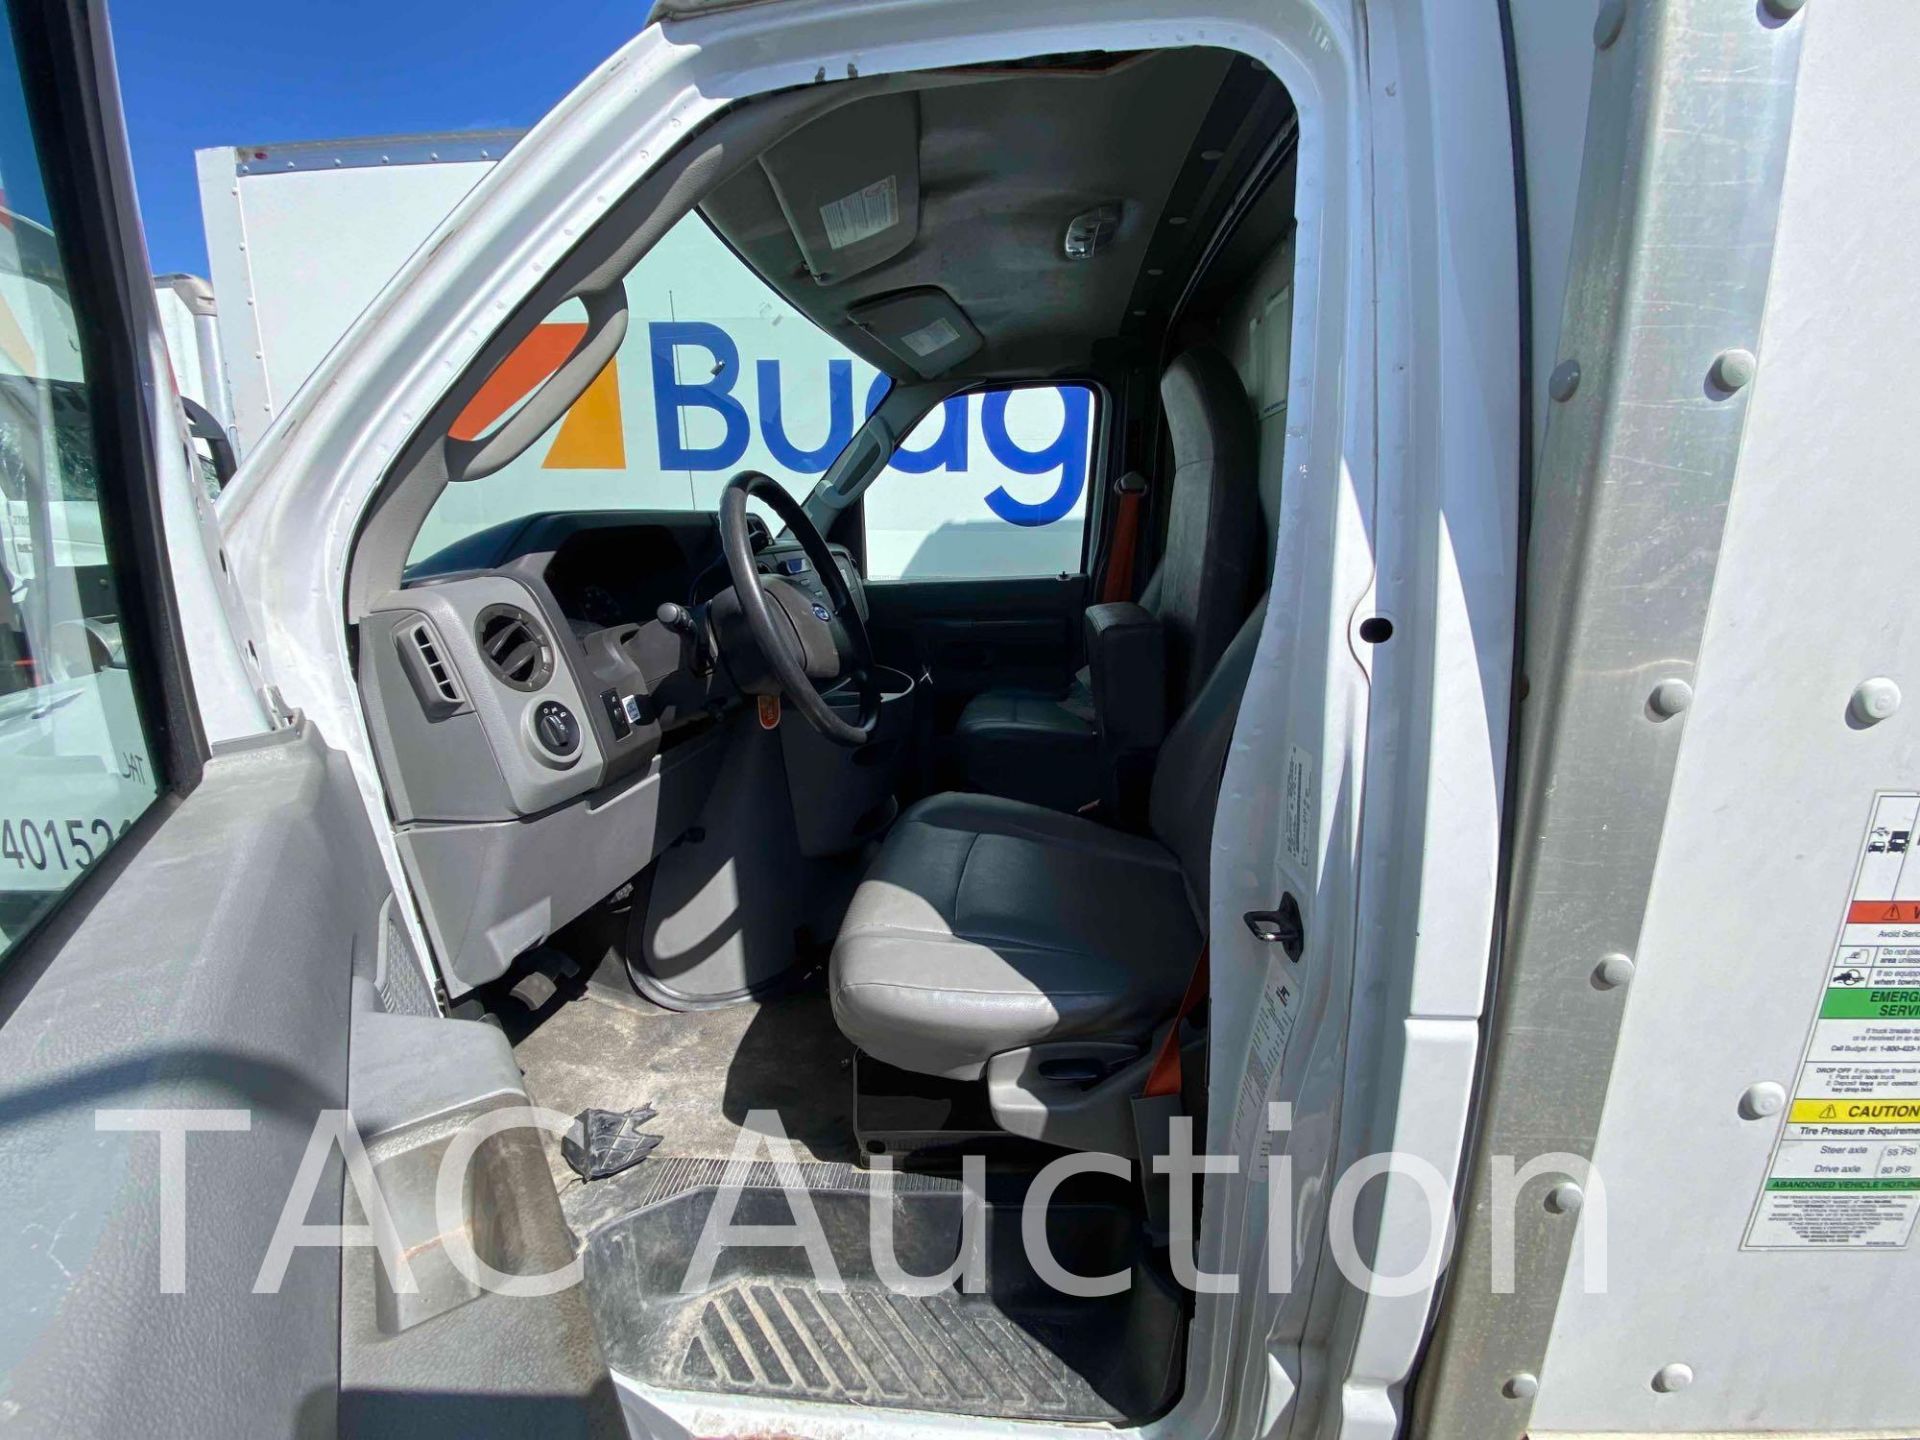 2014 Ford E-350 12ft Box Truck - Image 16 of 45